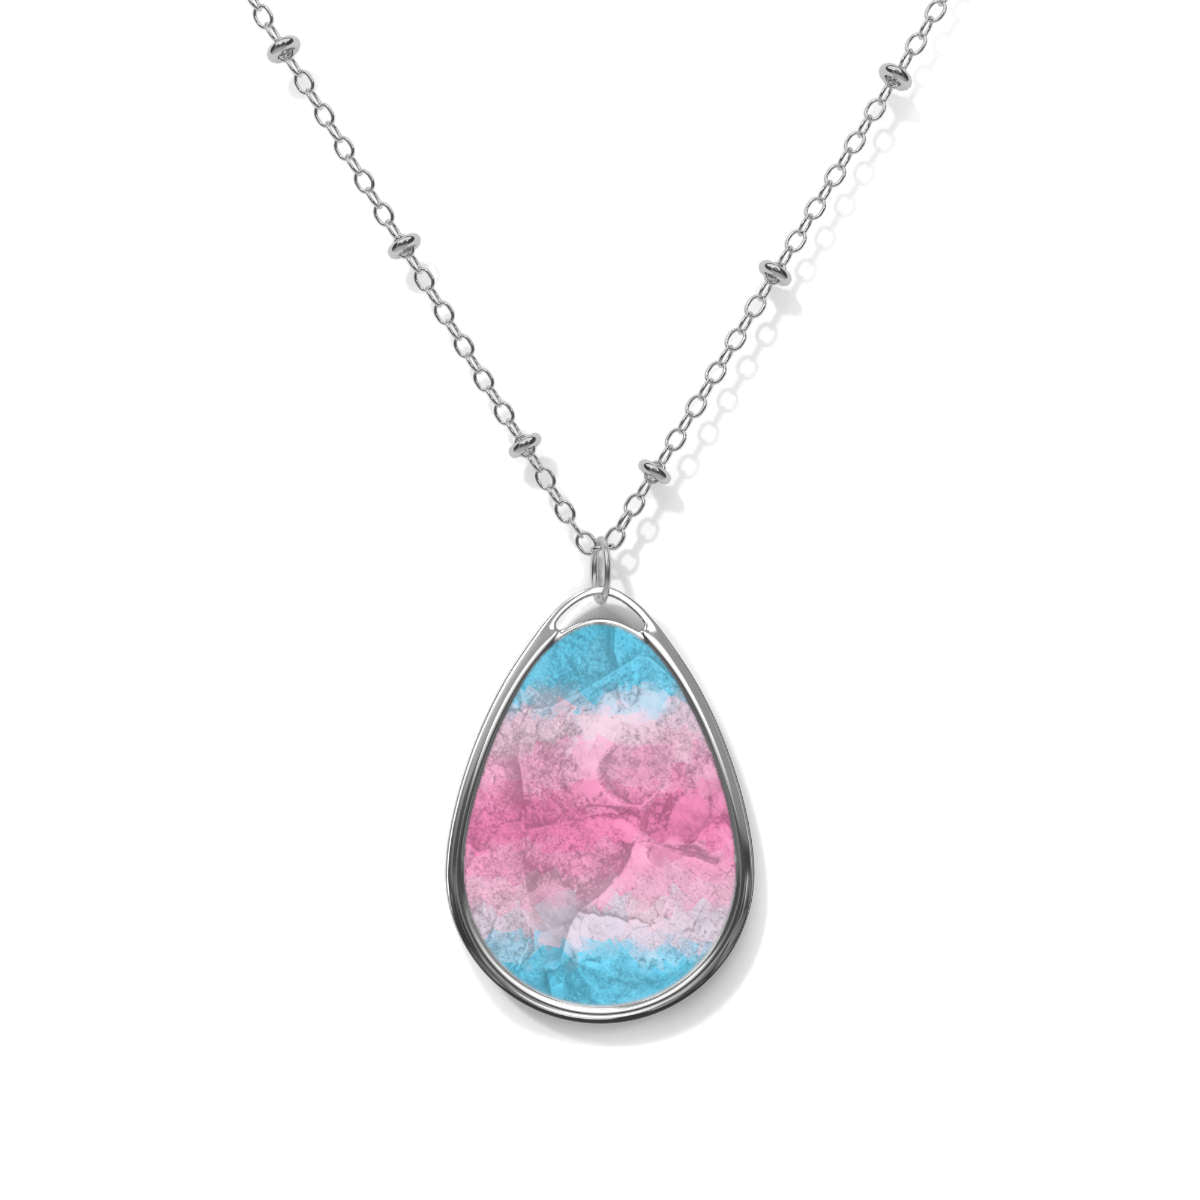 Faux Stone Gender Oval Necklace | Choose Your Gender Pride Flag Colourway